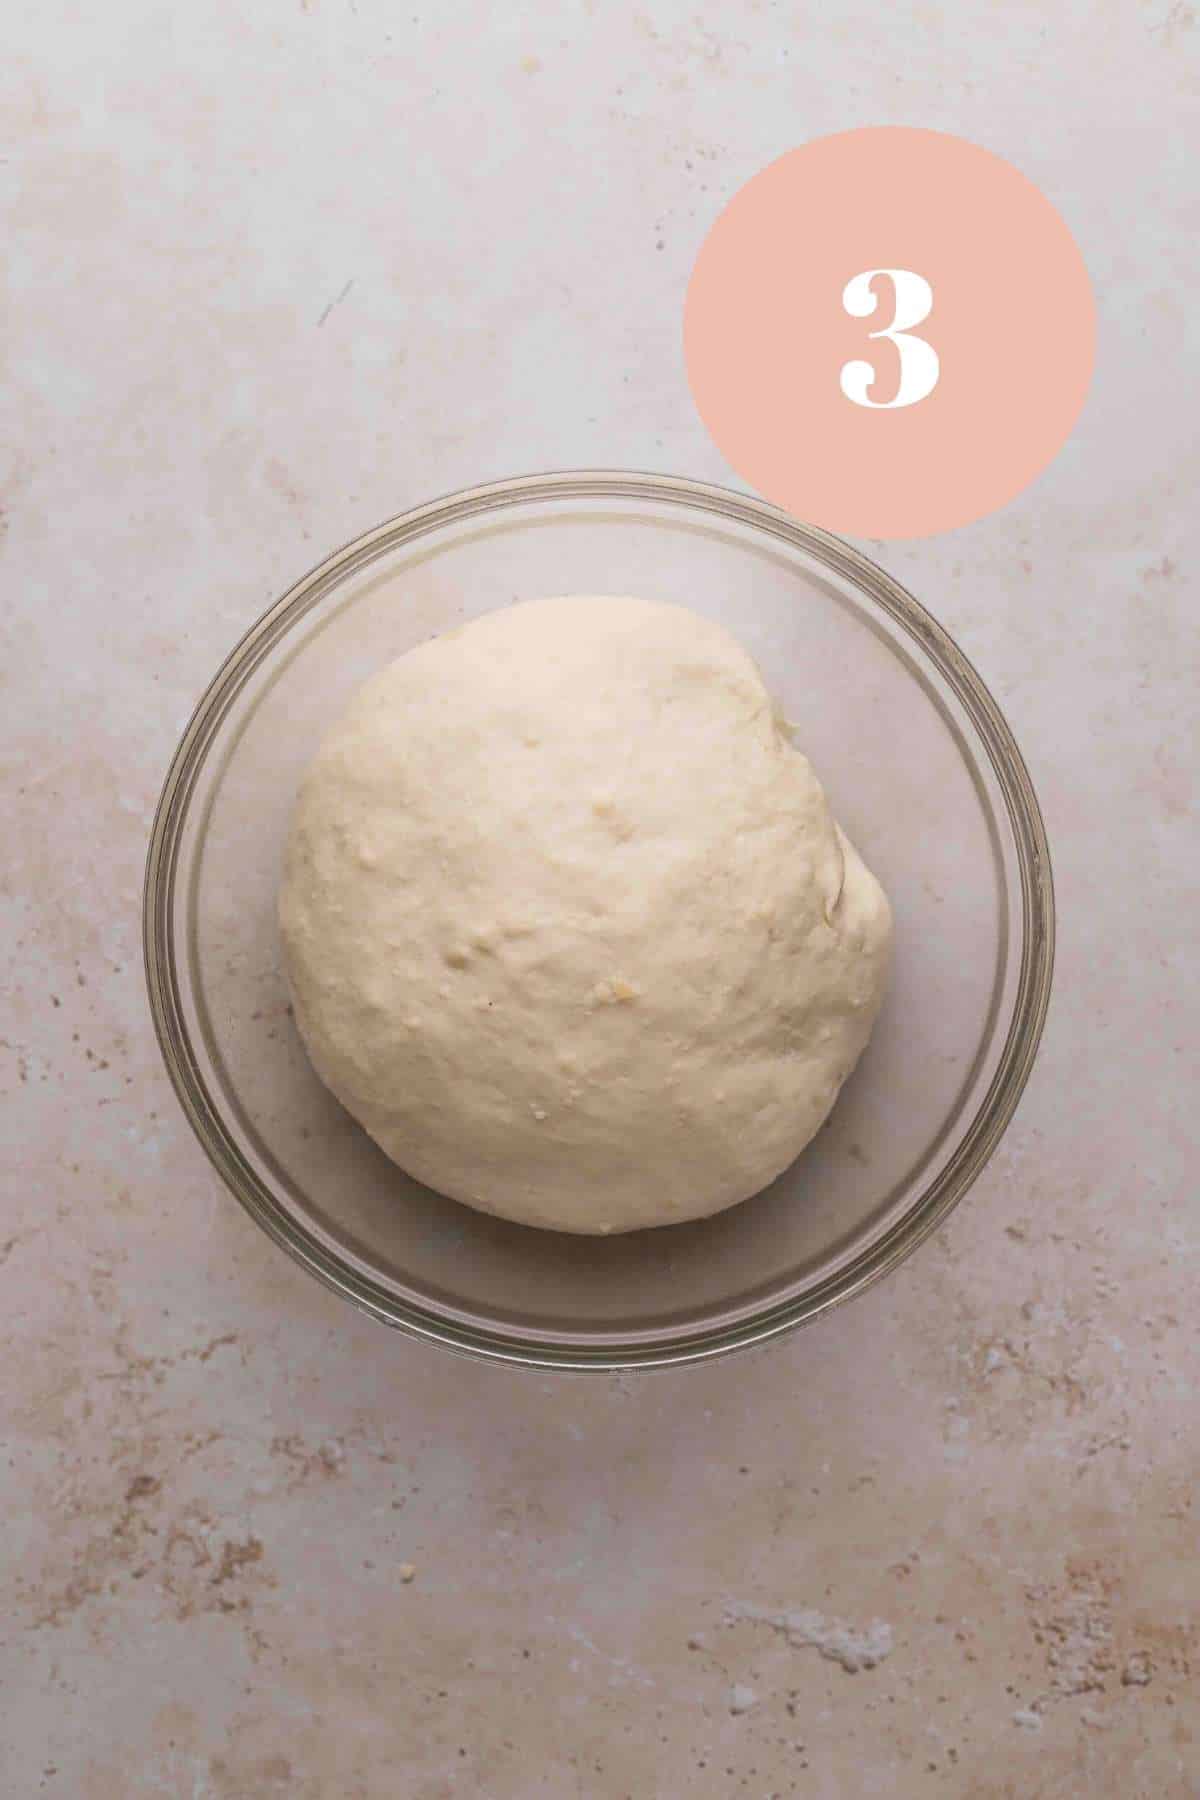 the parmesan bread bite dough after it has doubled in size.